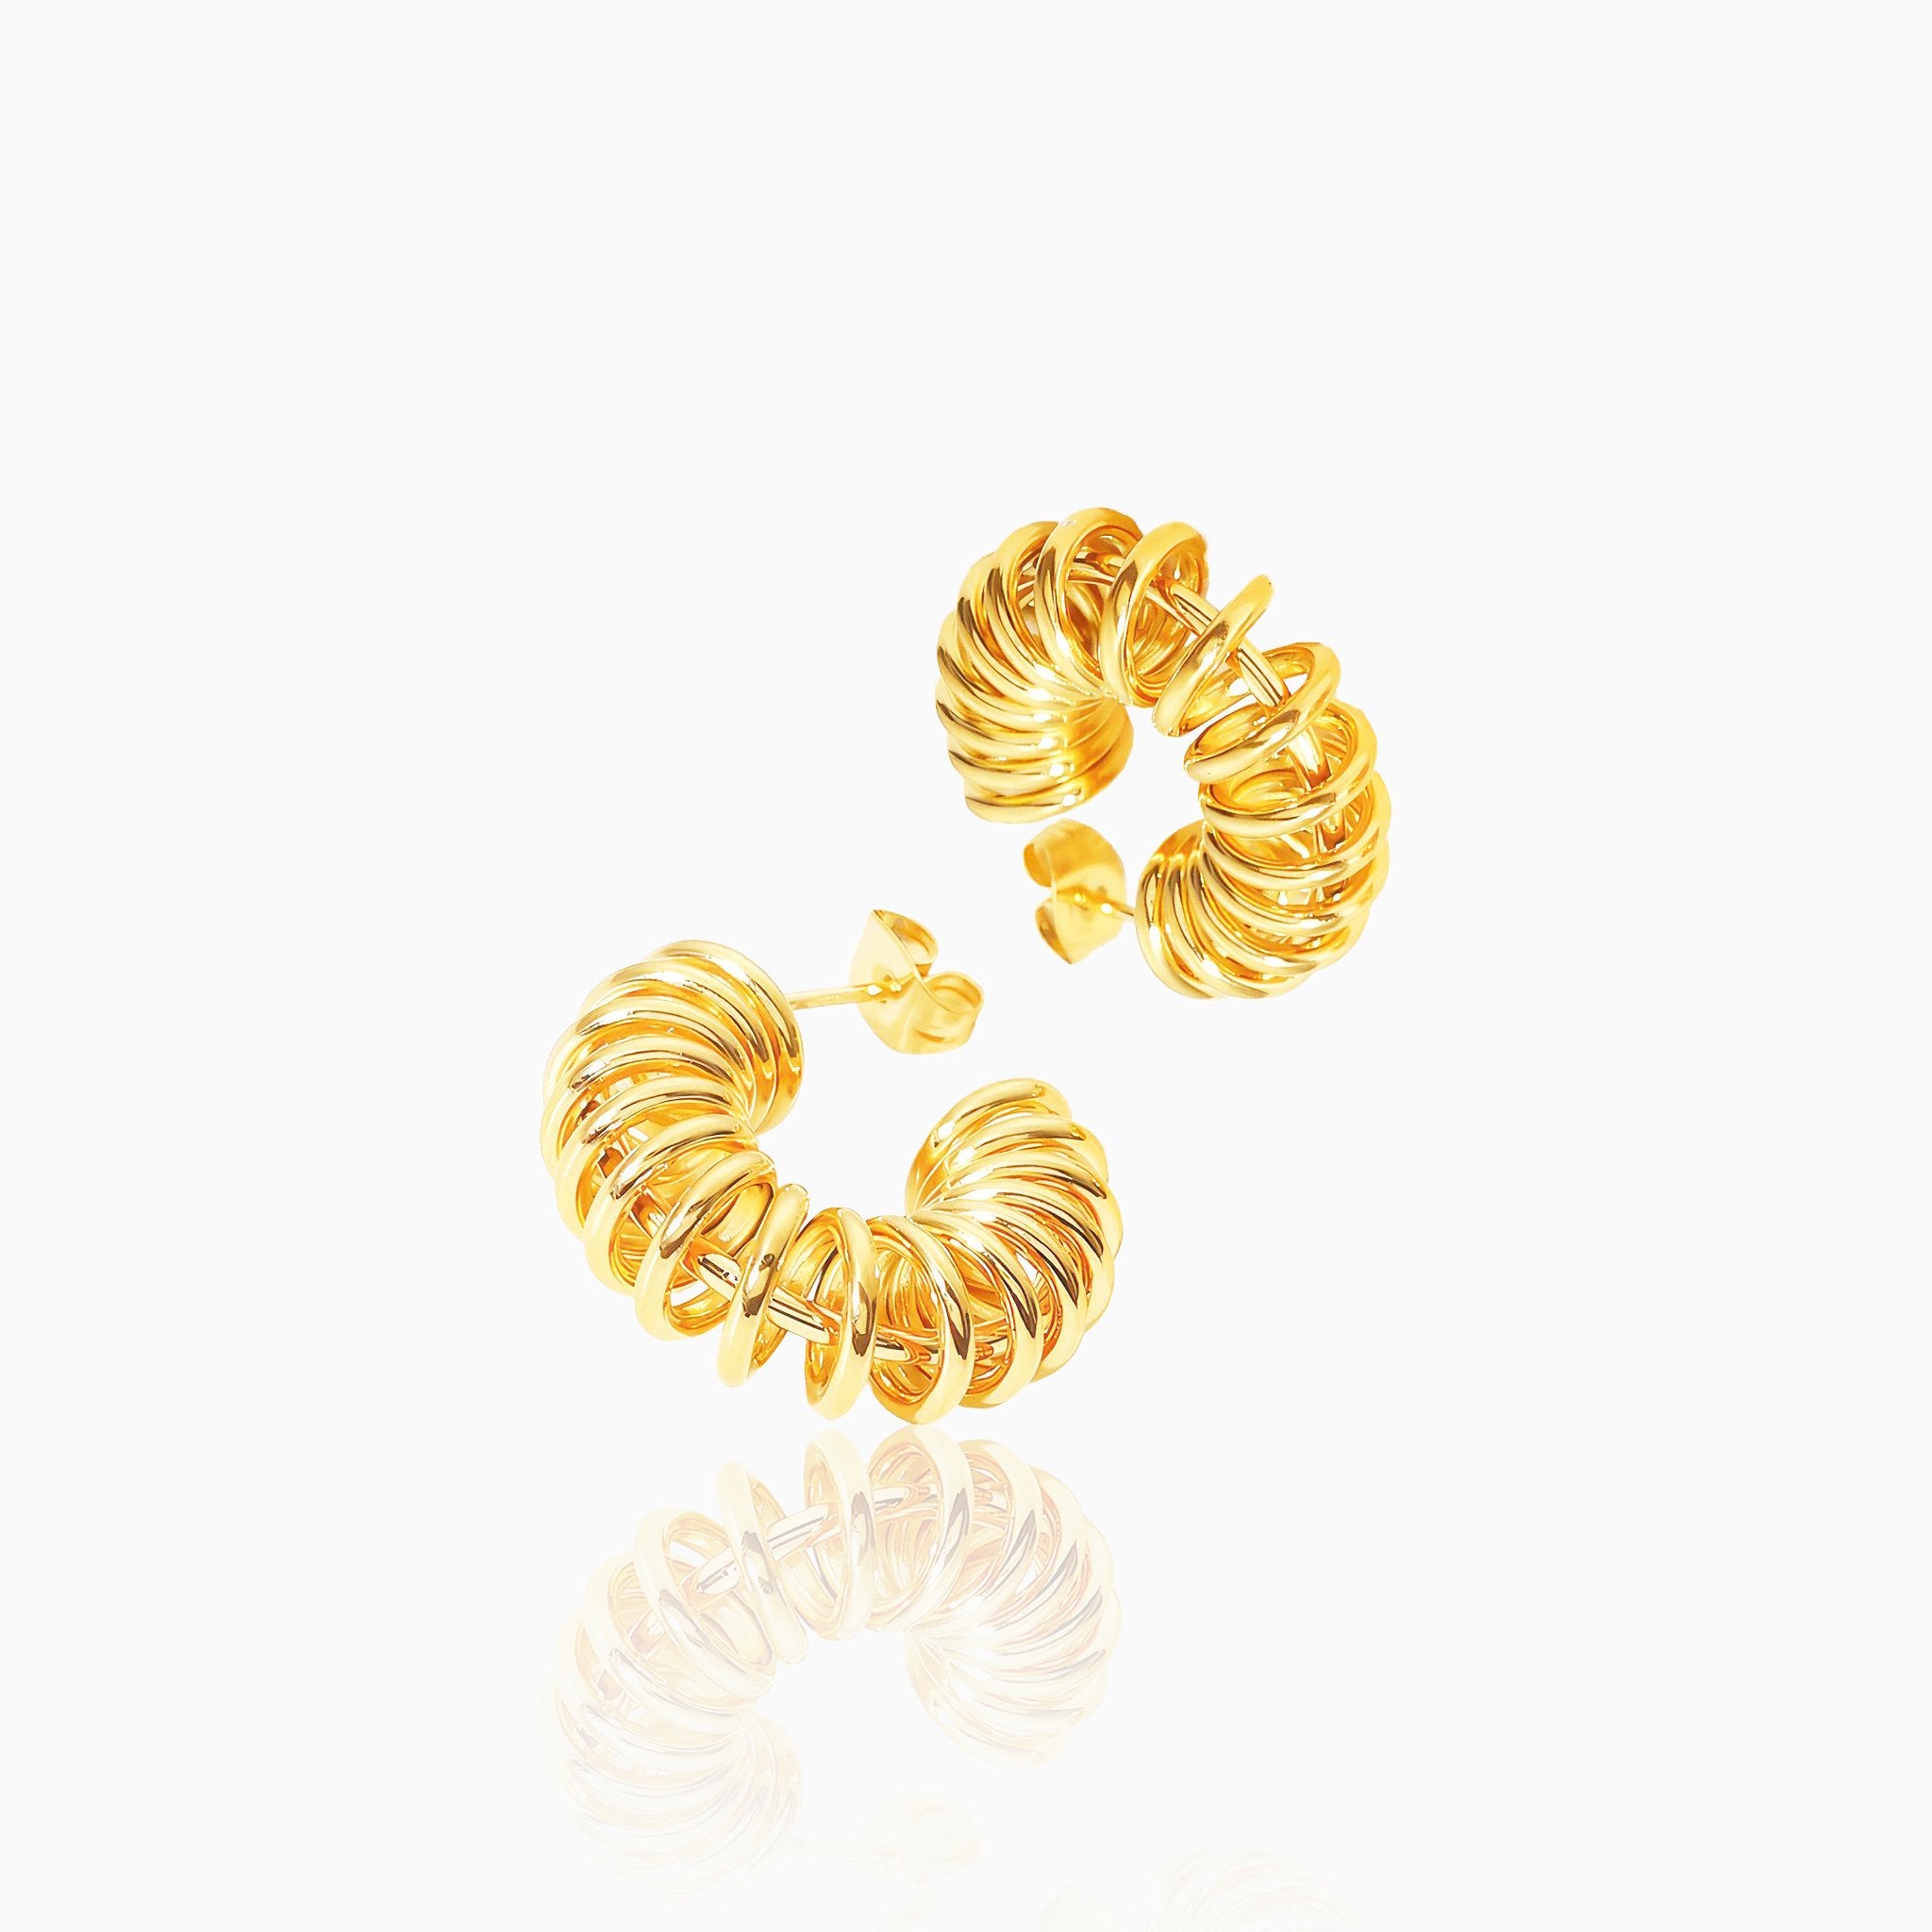 Electric Coil Geometric Earrings - Nobbier - Earrings - 18K Gold And Titanium PVD Coated Jewelry